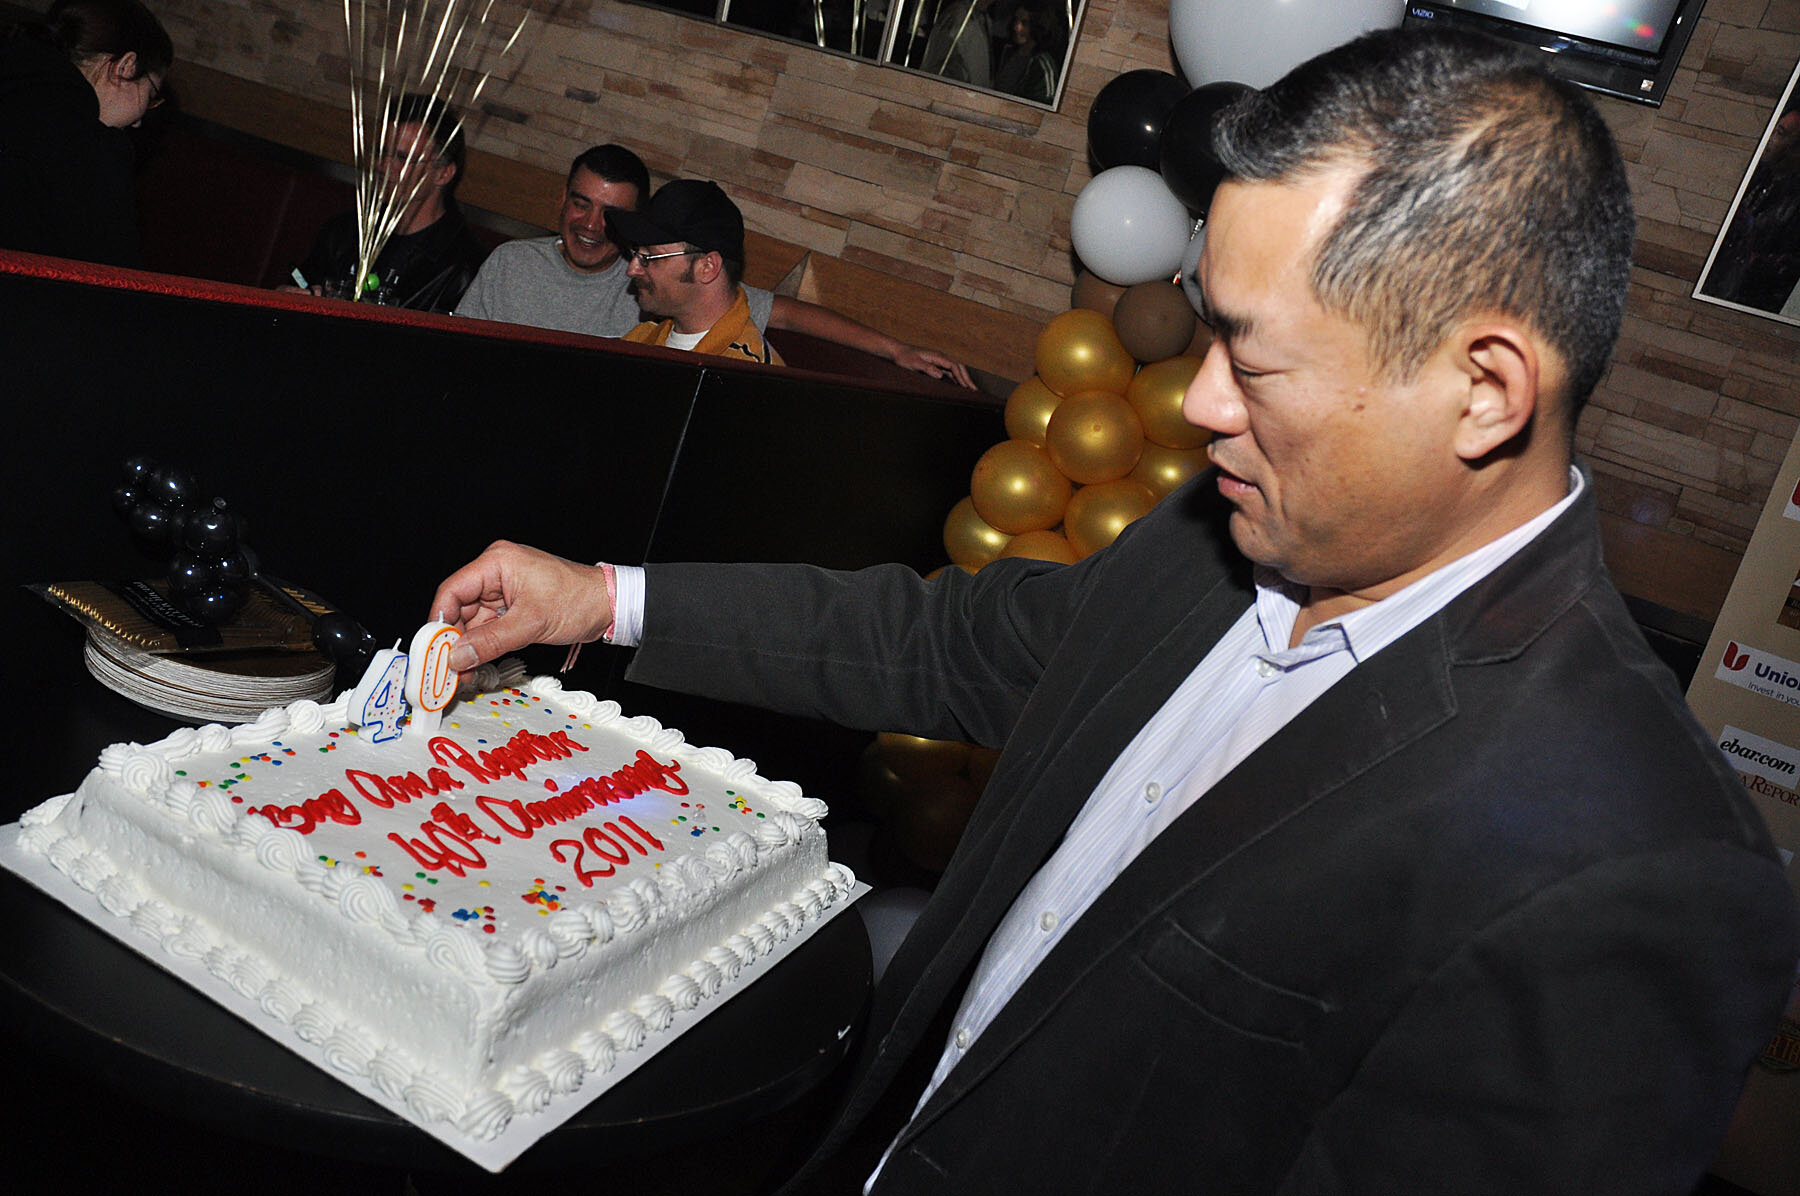  Mike Yamashita cutting a cake to celebrate the B.A.R.’s 40th Anniversary, April 9, 2011; photograph by and courtesy of Rick Gerharter. 